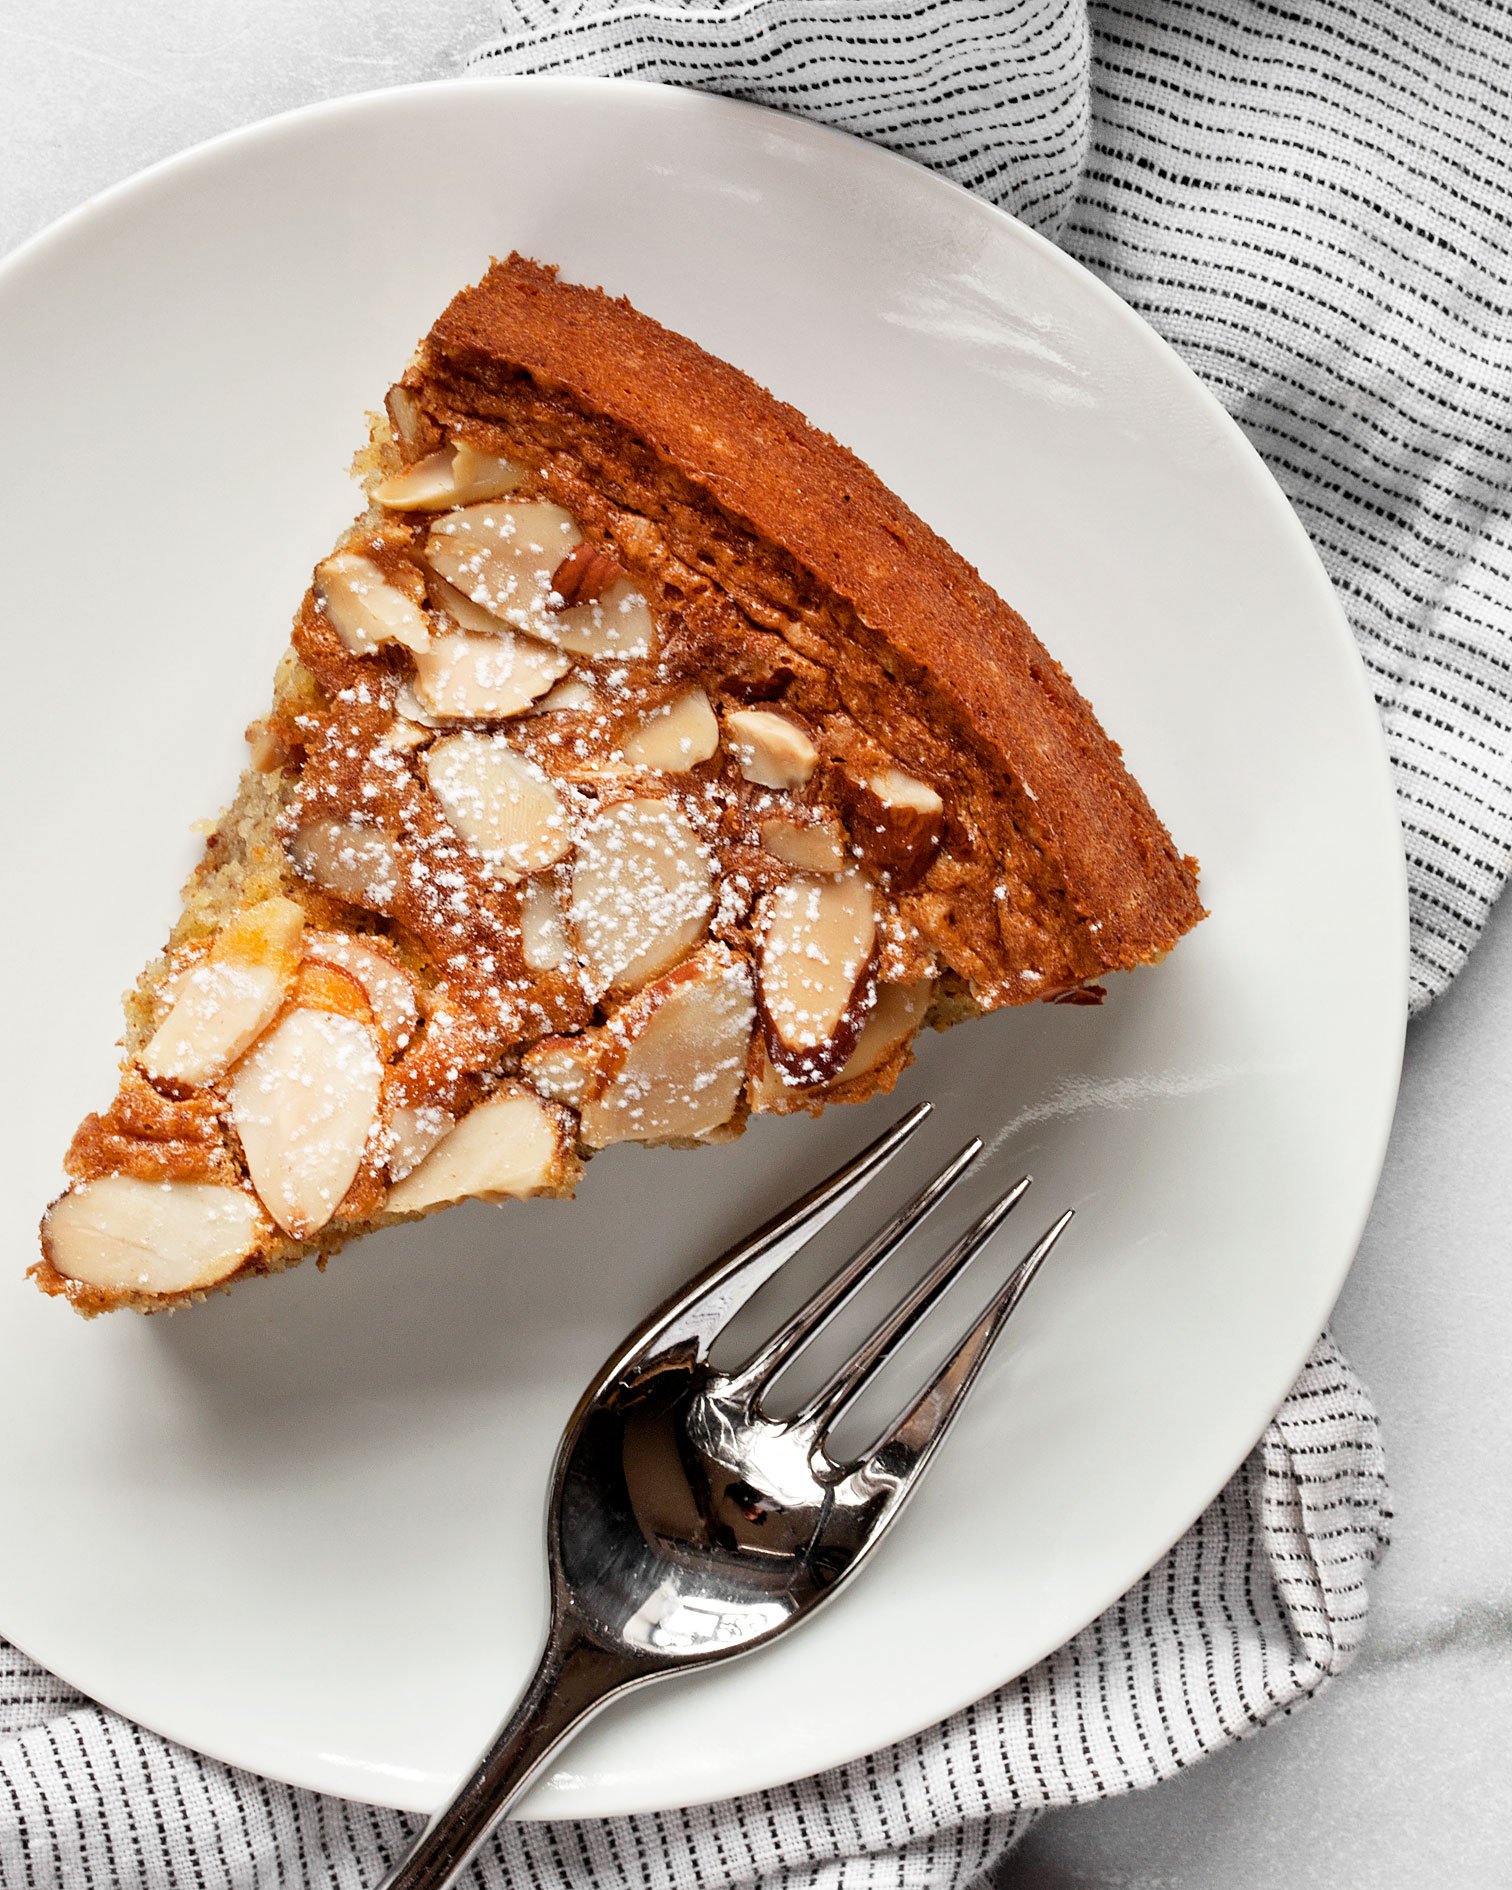 Slice of almond cake with a fork on a plate.